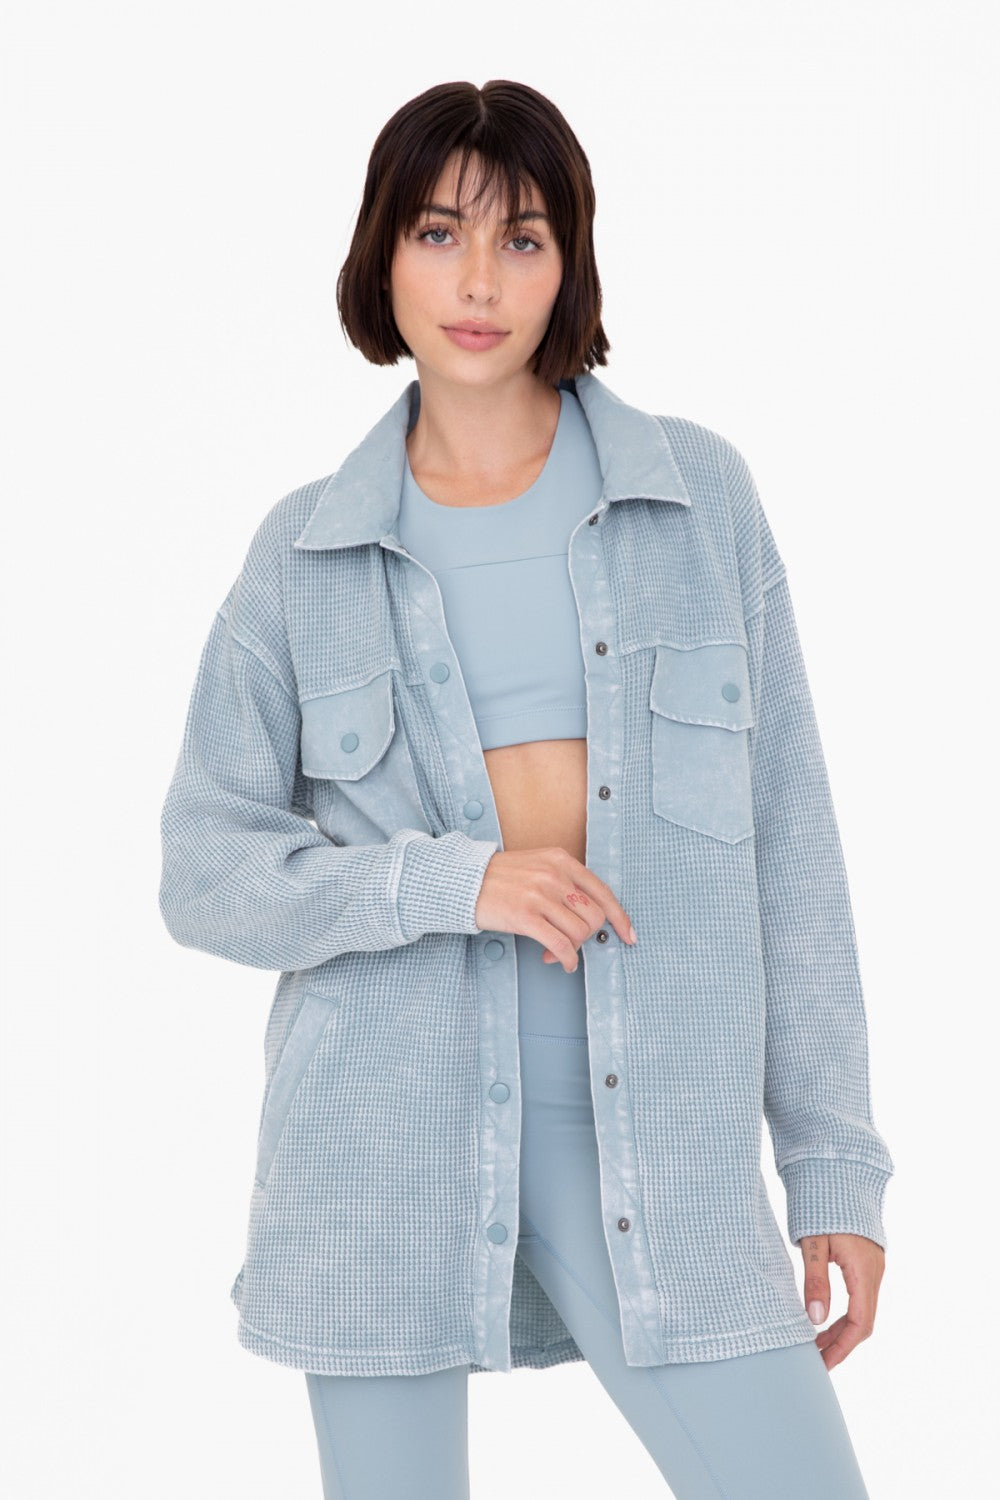 Waffle Knit Mineral Washed Button Down Shacket - Smoky Blue